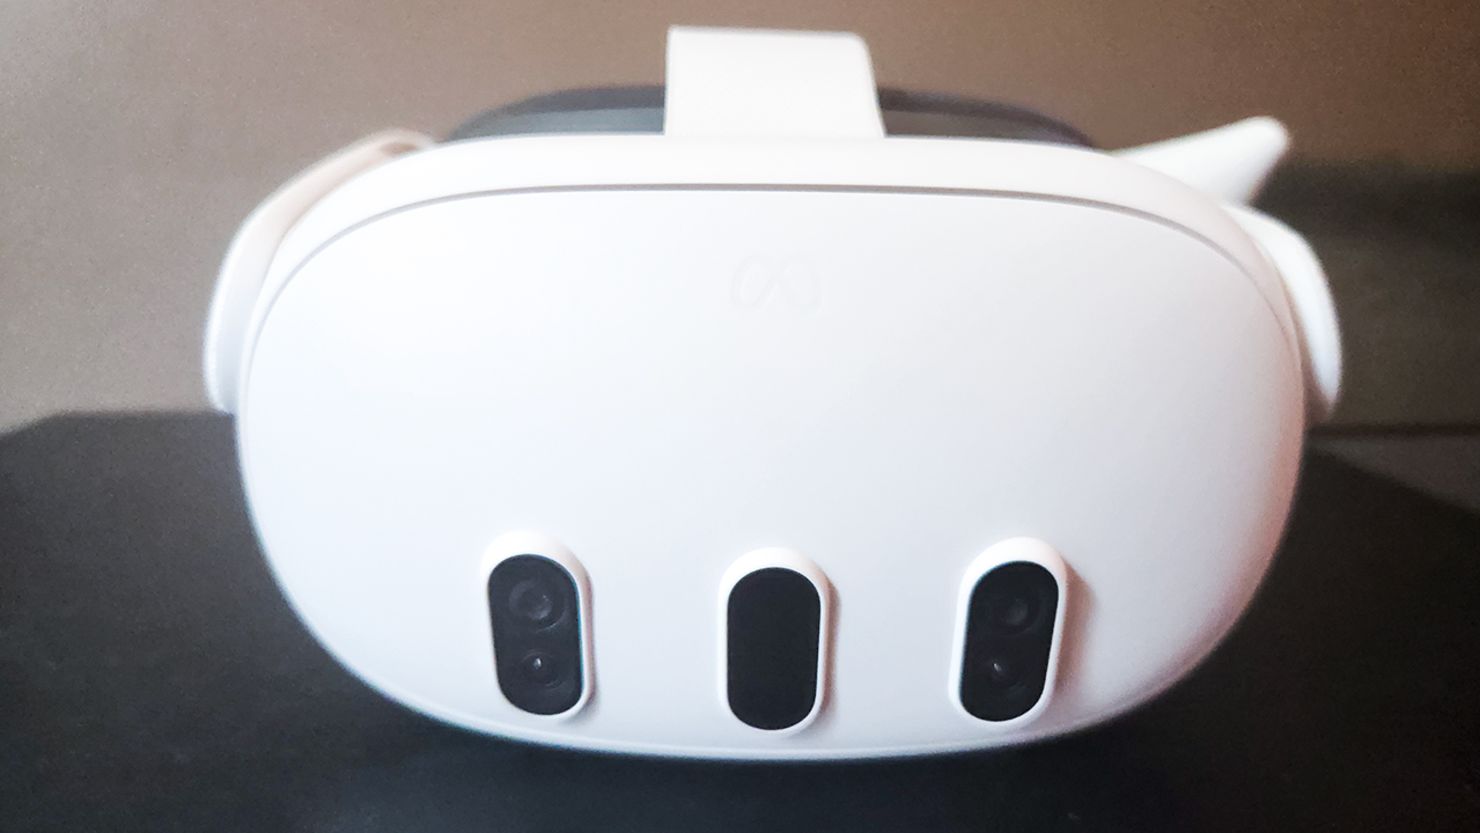 Meta Quest 3 review: The best VR headset overall